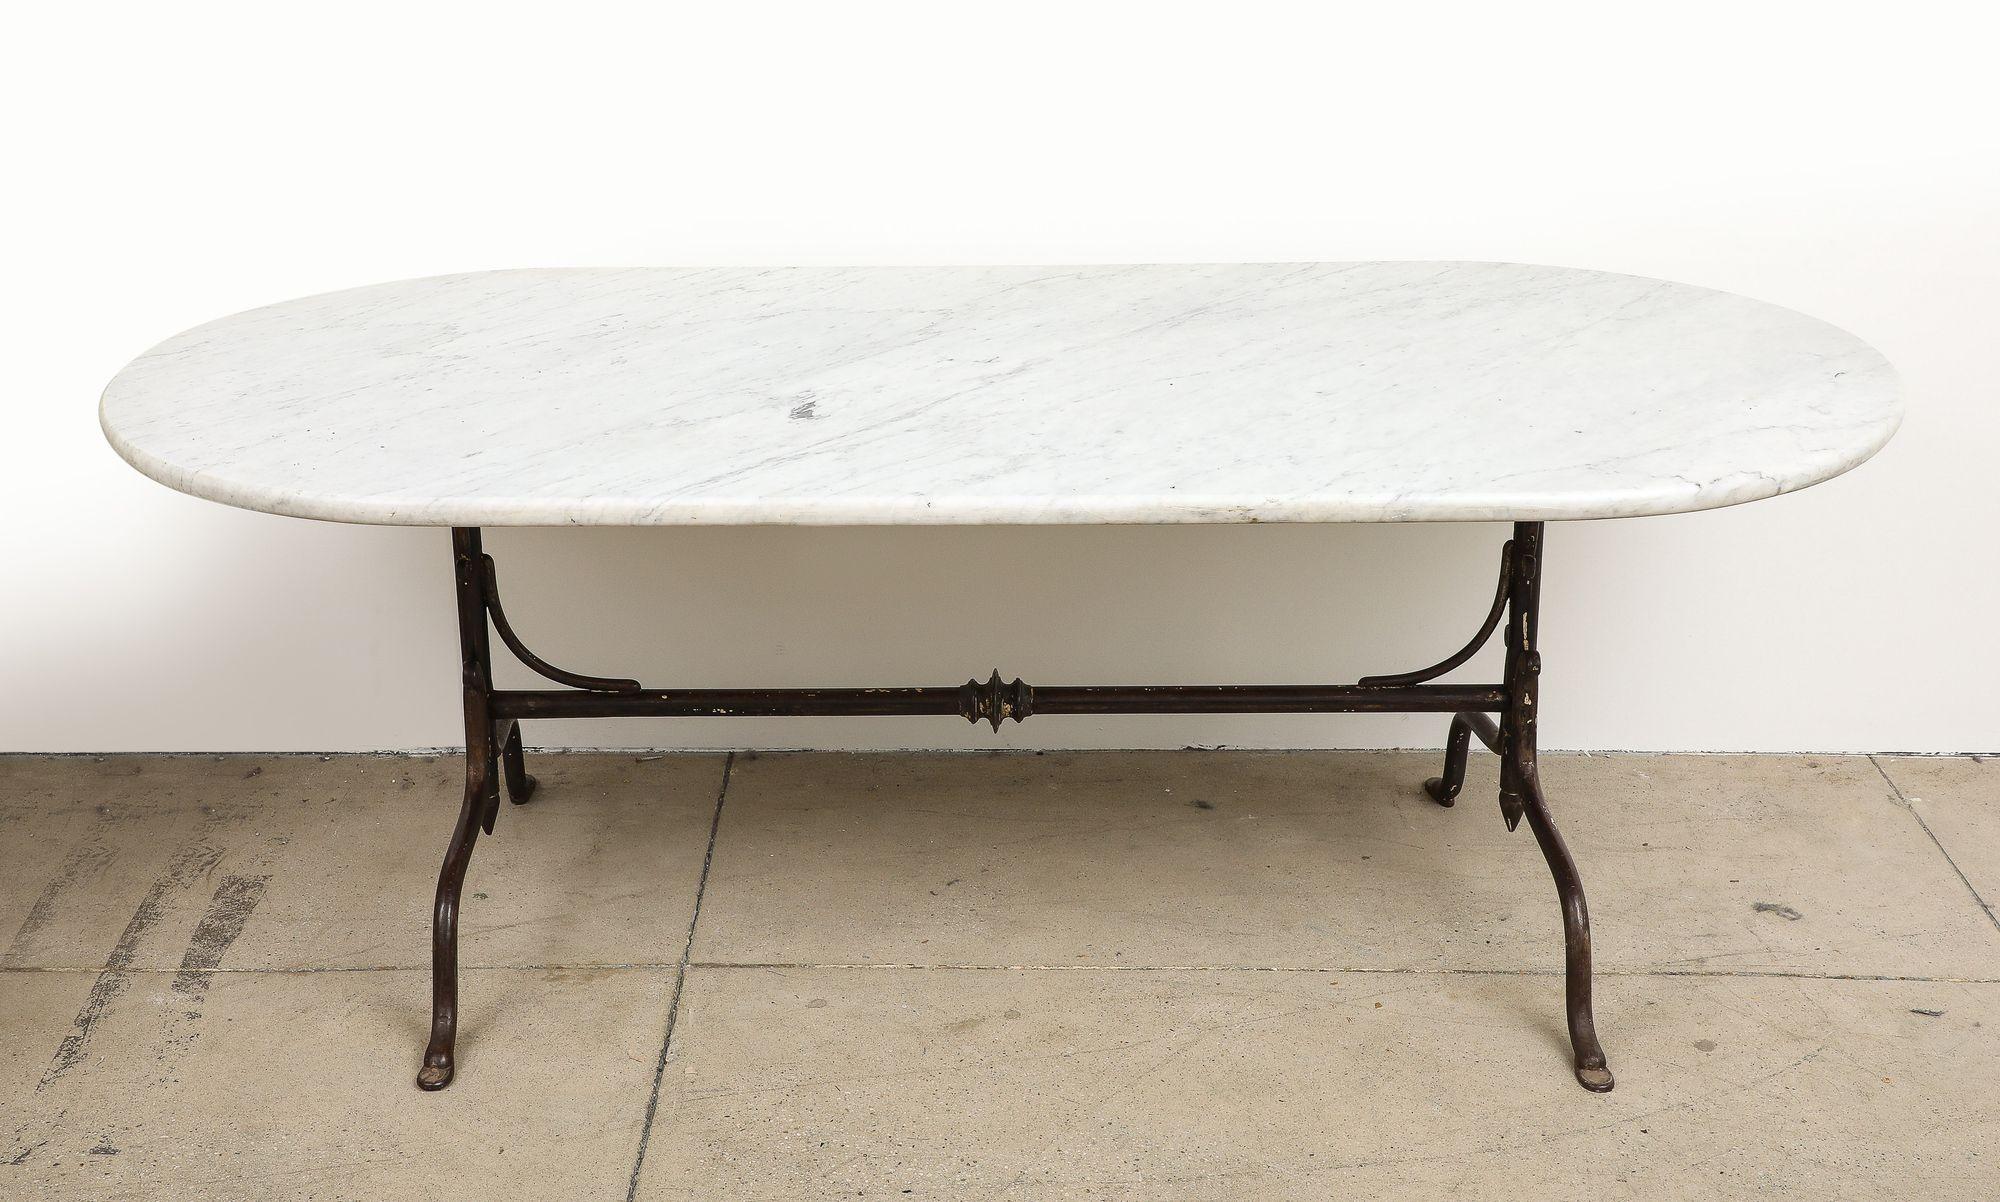 A mid 20th Century French dining table features a graceful white marble oval shaped top with an iron trestle base. Elegance meets functionality in a captivating outdoor dining table. This table exudes timeless charm, working beautifully in a home,